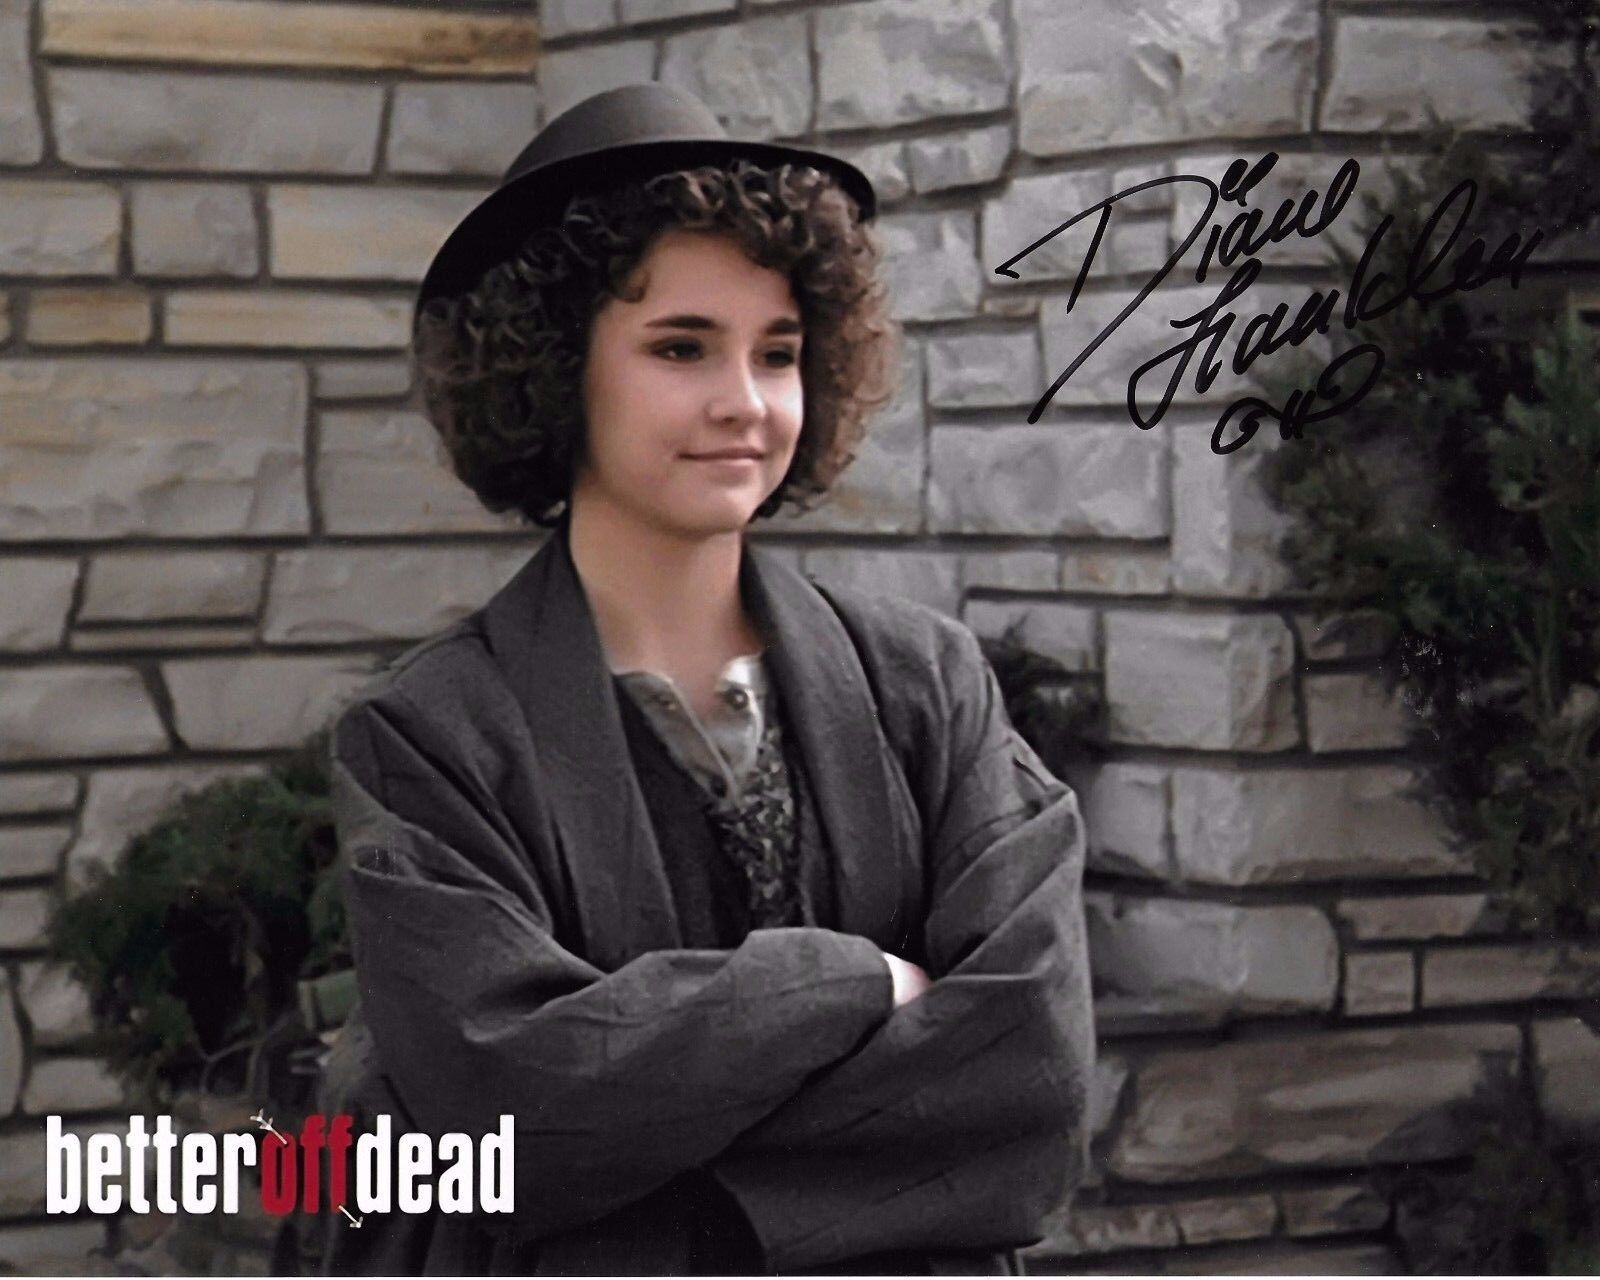 Diane Franklin Signed Photo Poster painting - The Last American Virgin / Better off Dead - H396